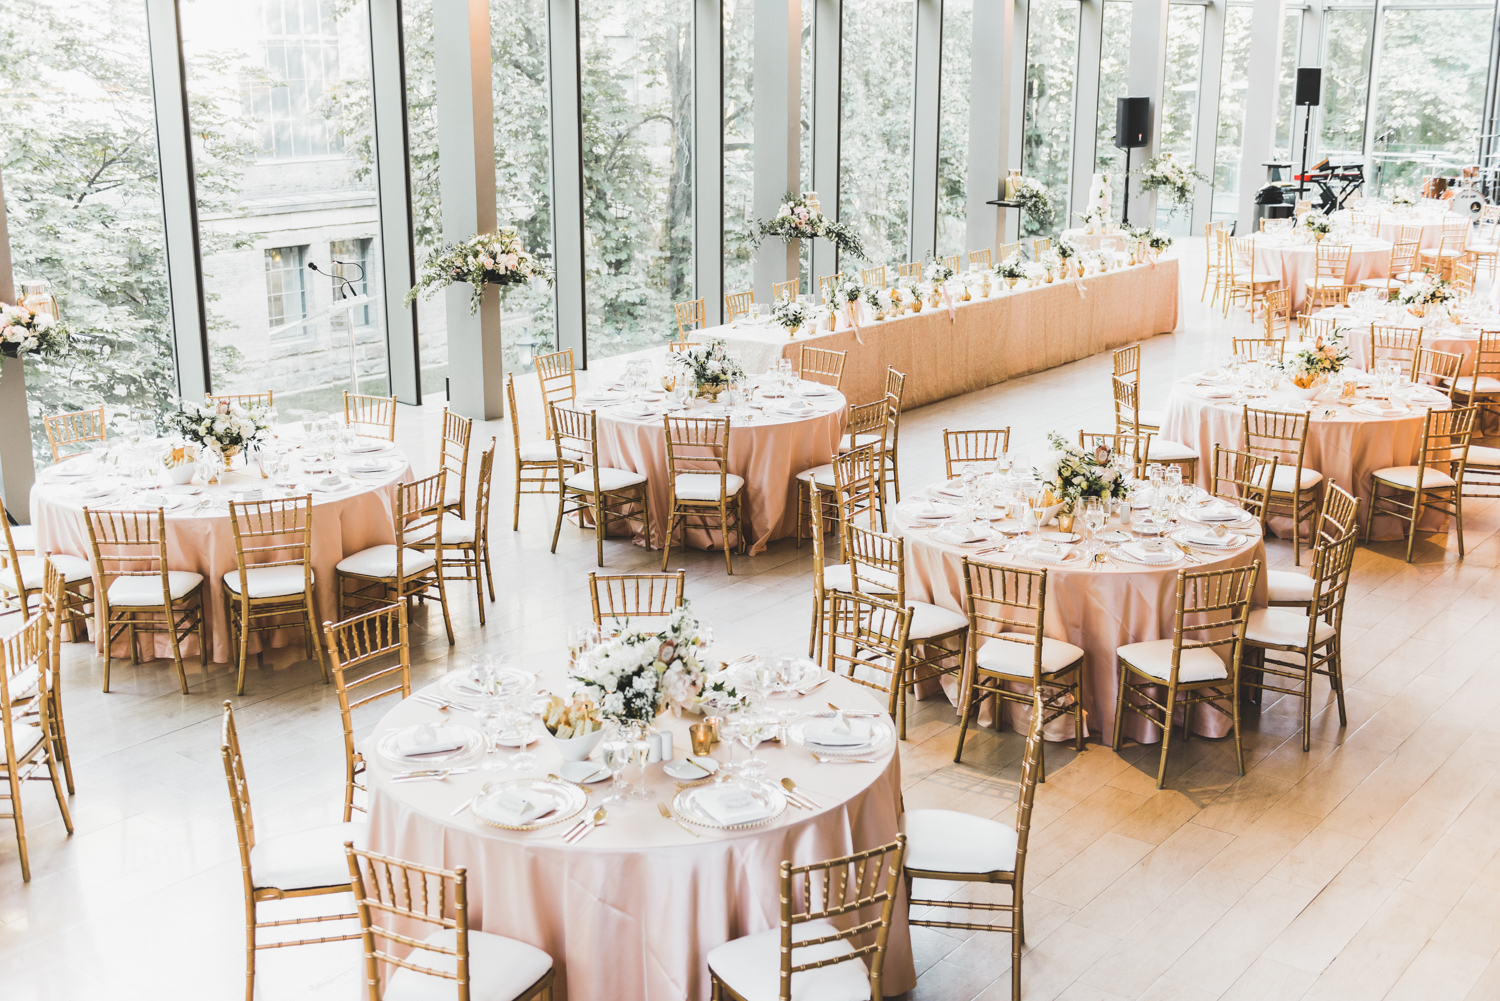 Blush tables and gold accents at this beautiful summer wedding at RCM